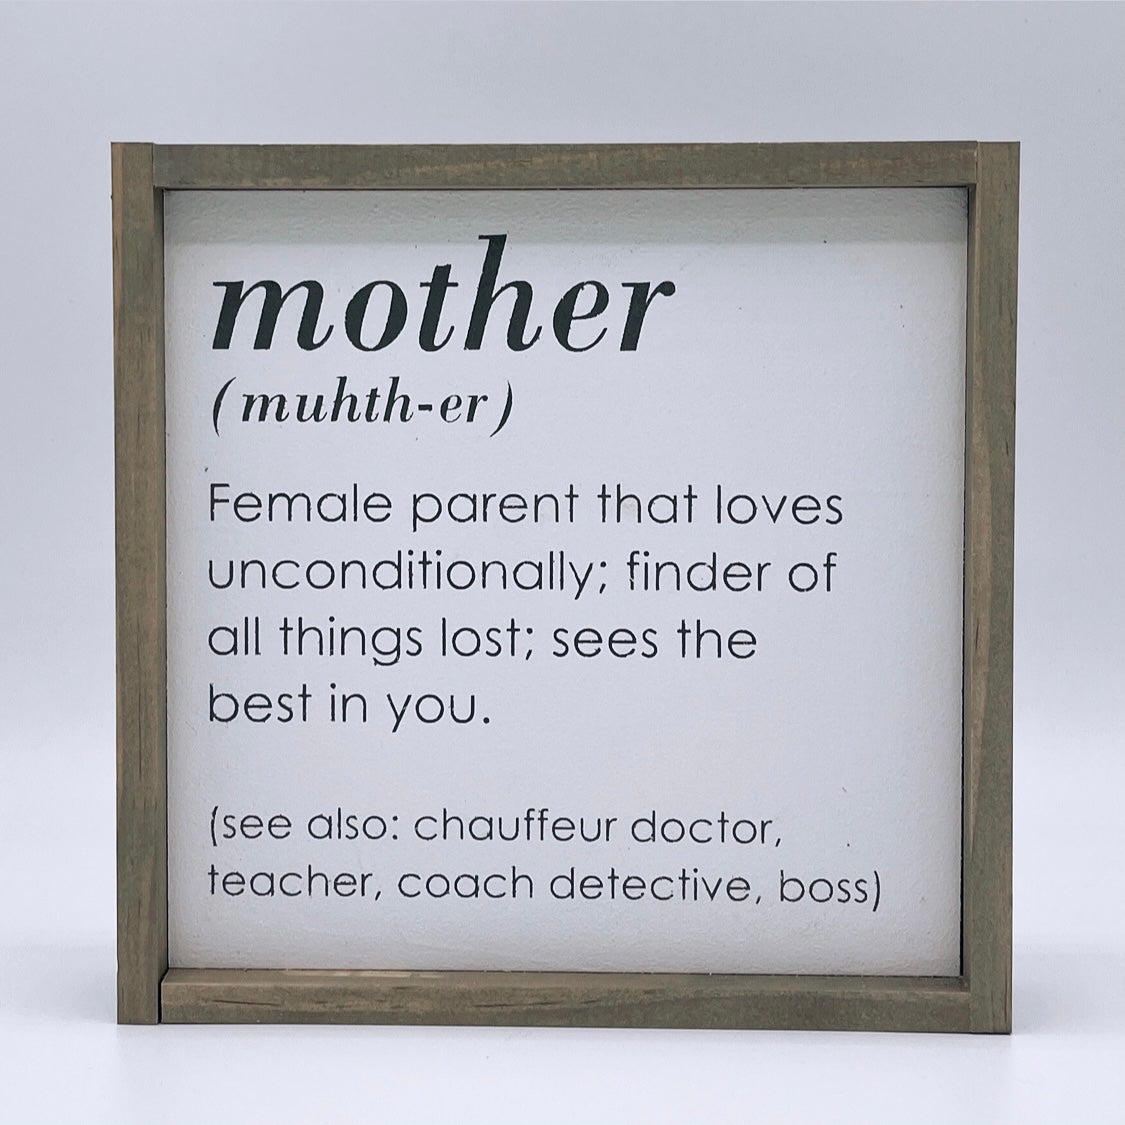 Mother: definition